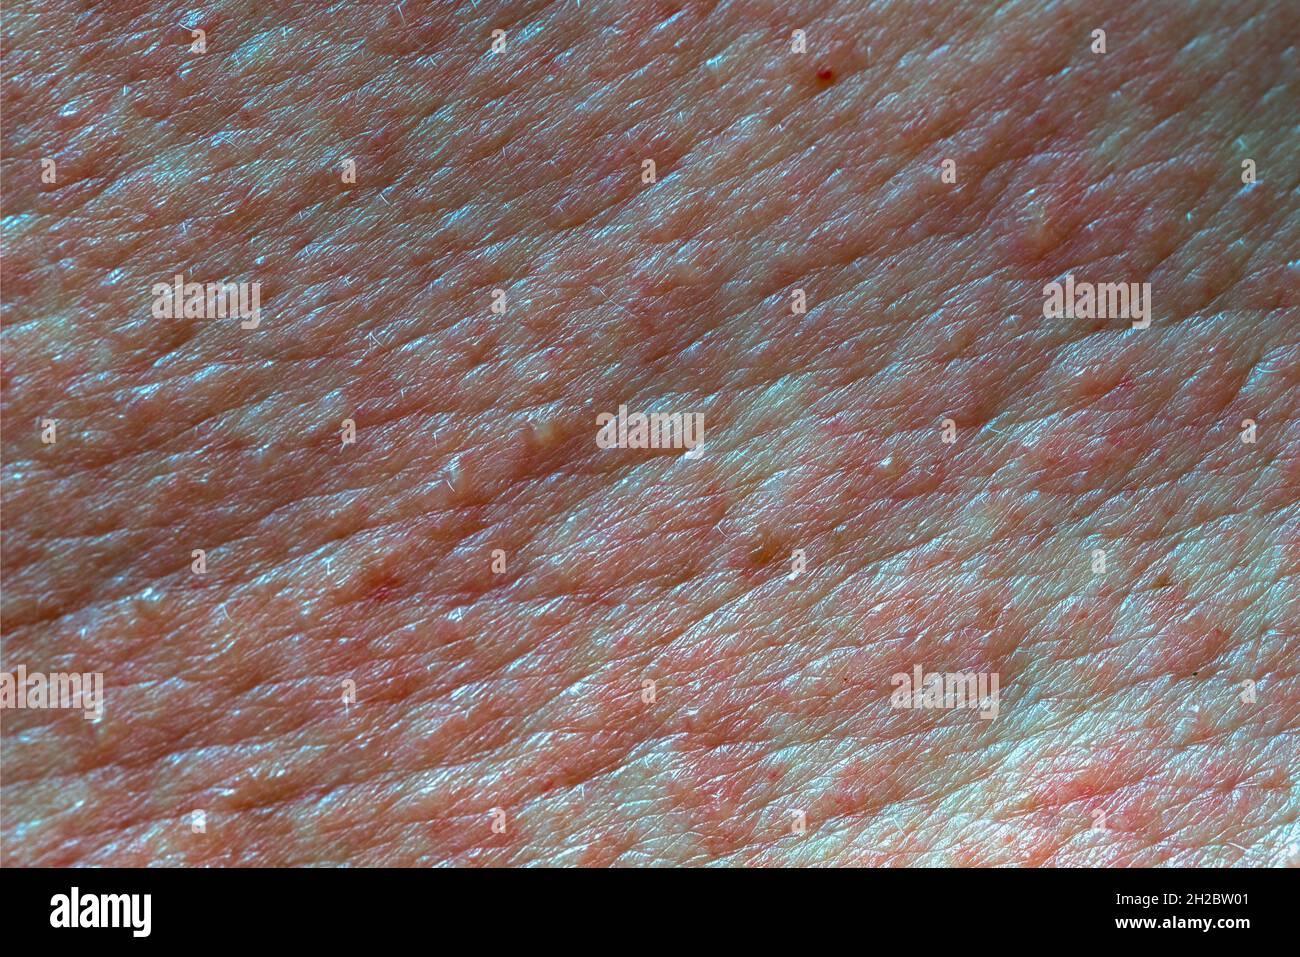 Skin texture painful in red blisters skin rashes after chemical burn Stock Photo